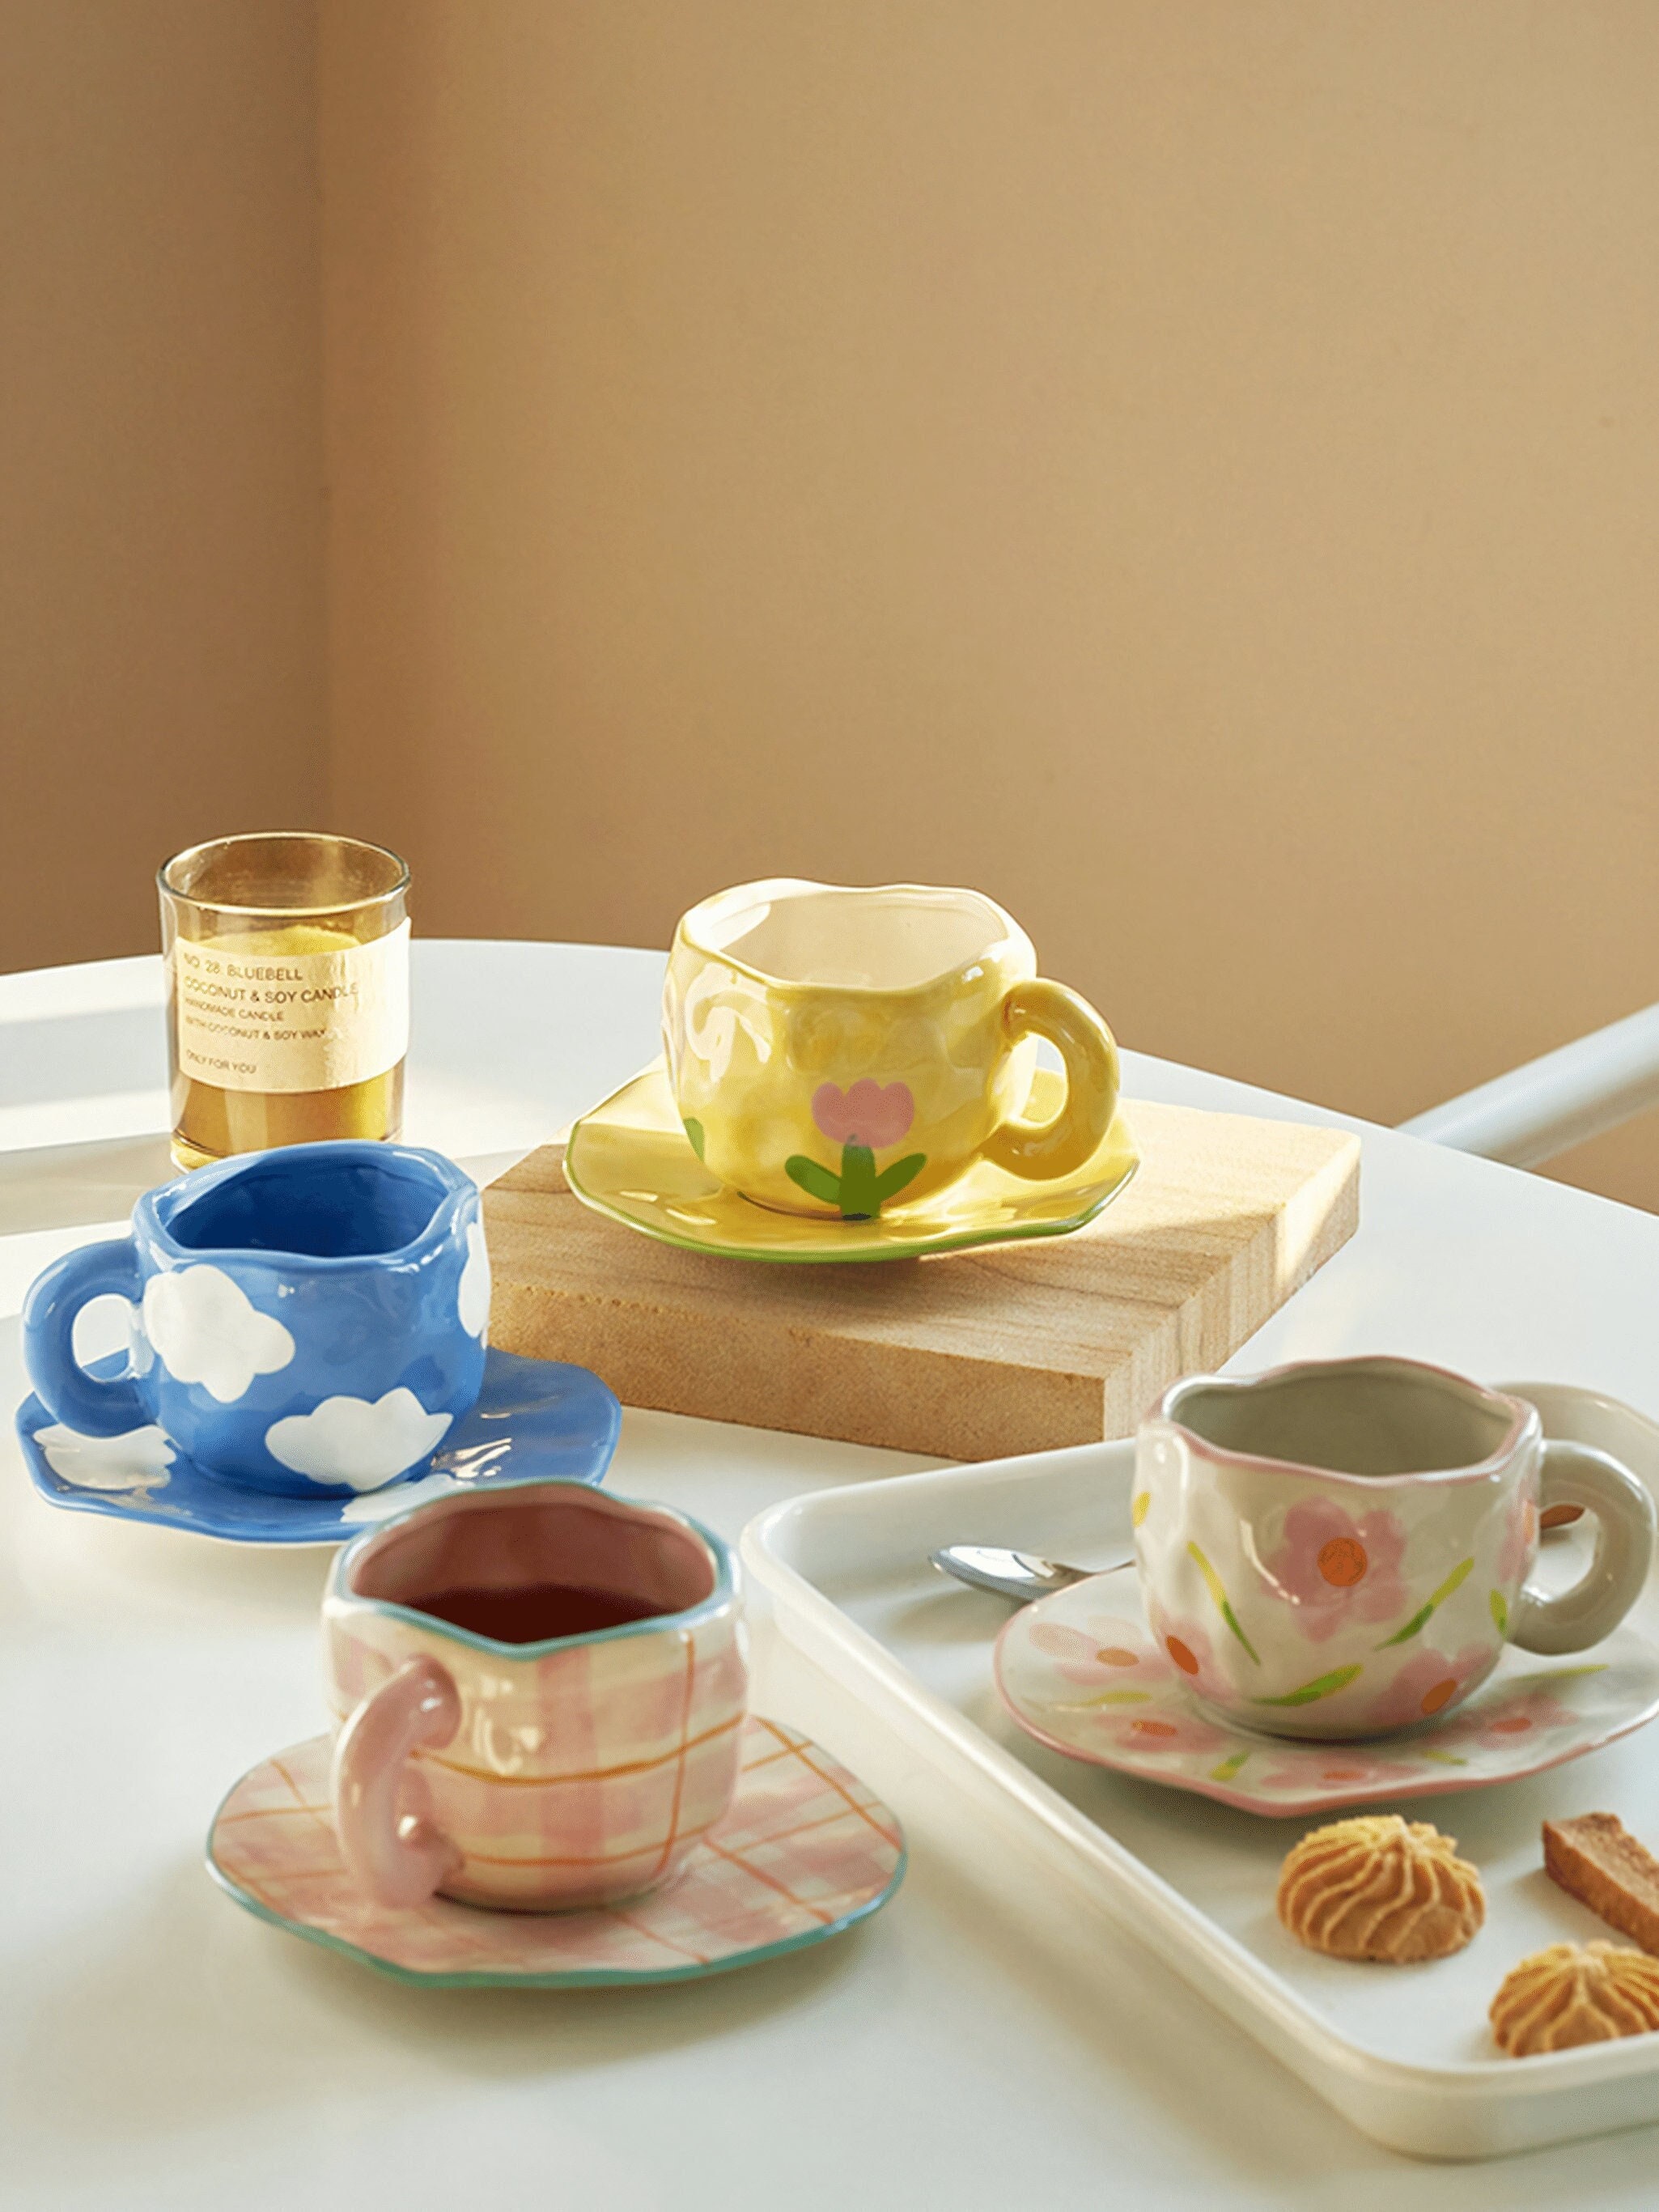 Tea Set Illustration Rogue Anime Teacup Anime Tea In A Teacup Anime Images  Background Tea Time Pictures Background Image And Wallpaper for Free  Download